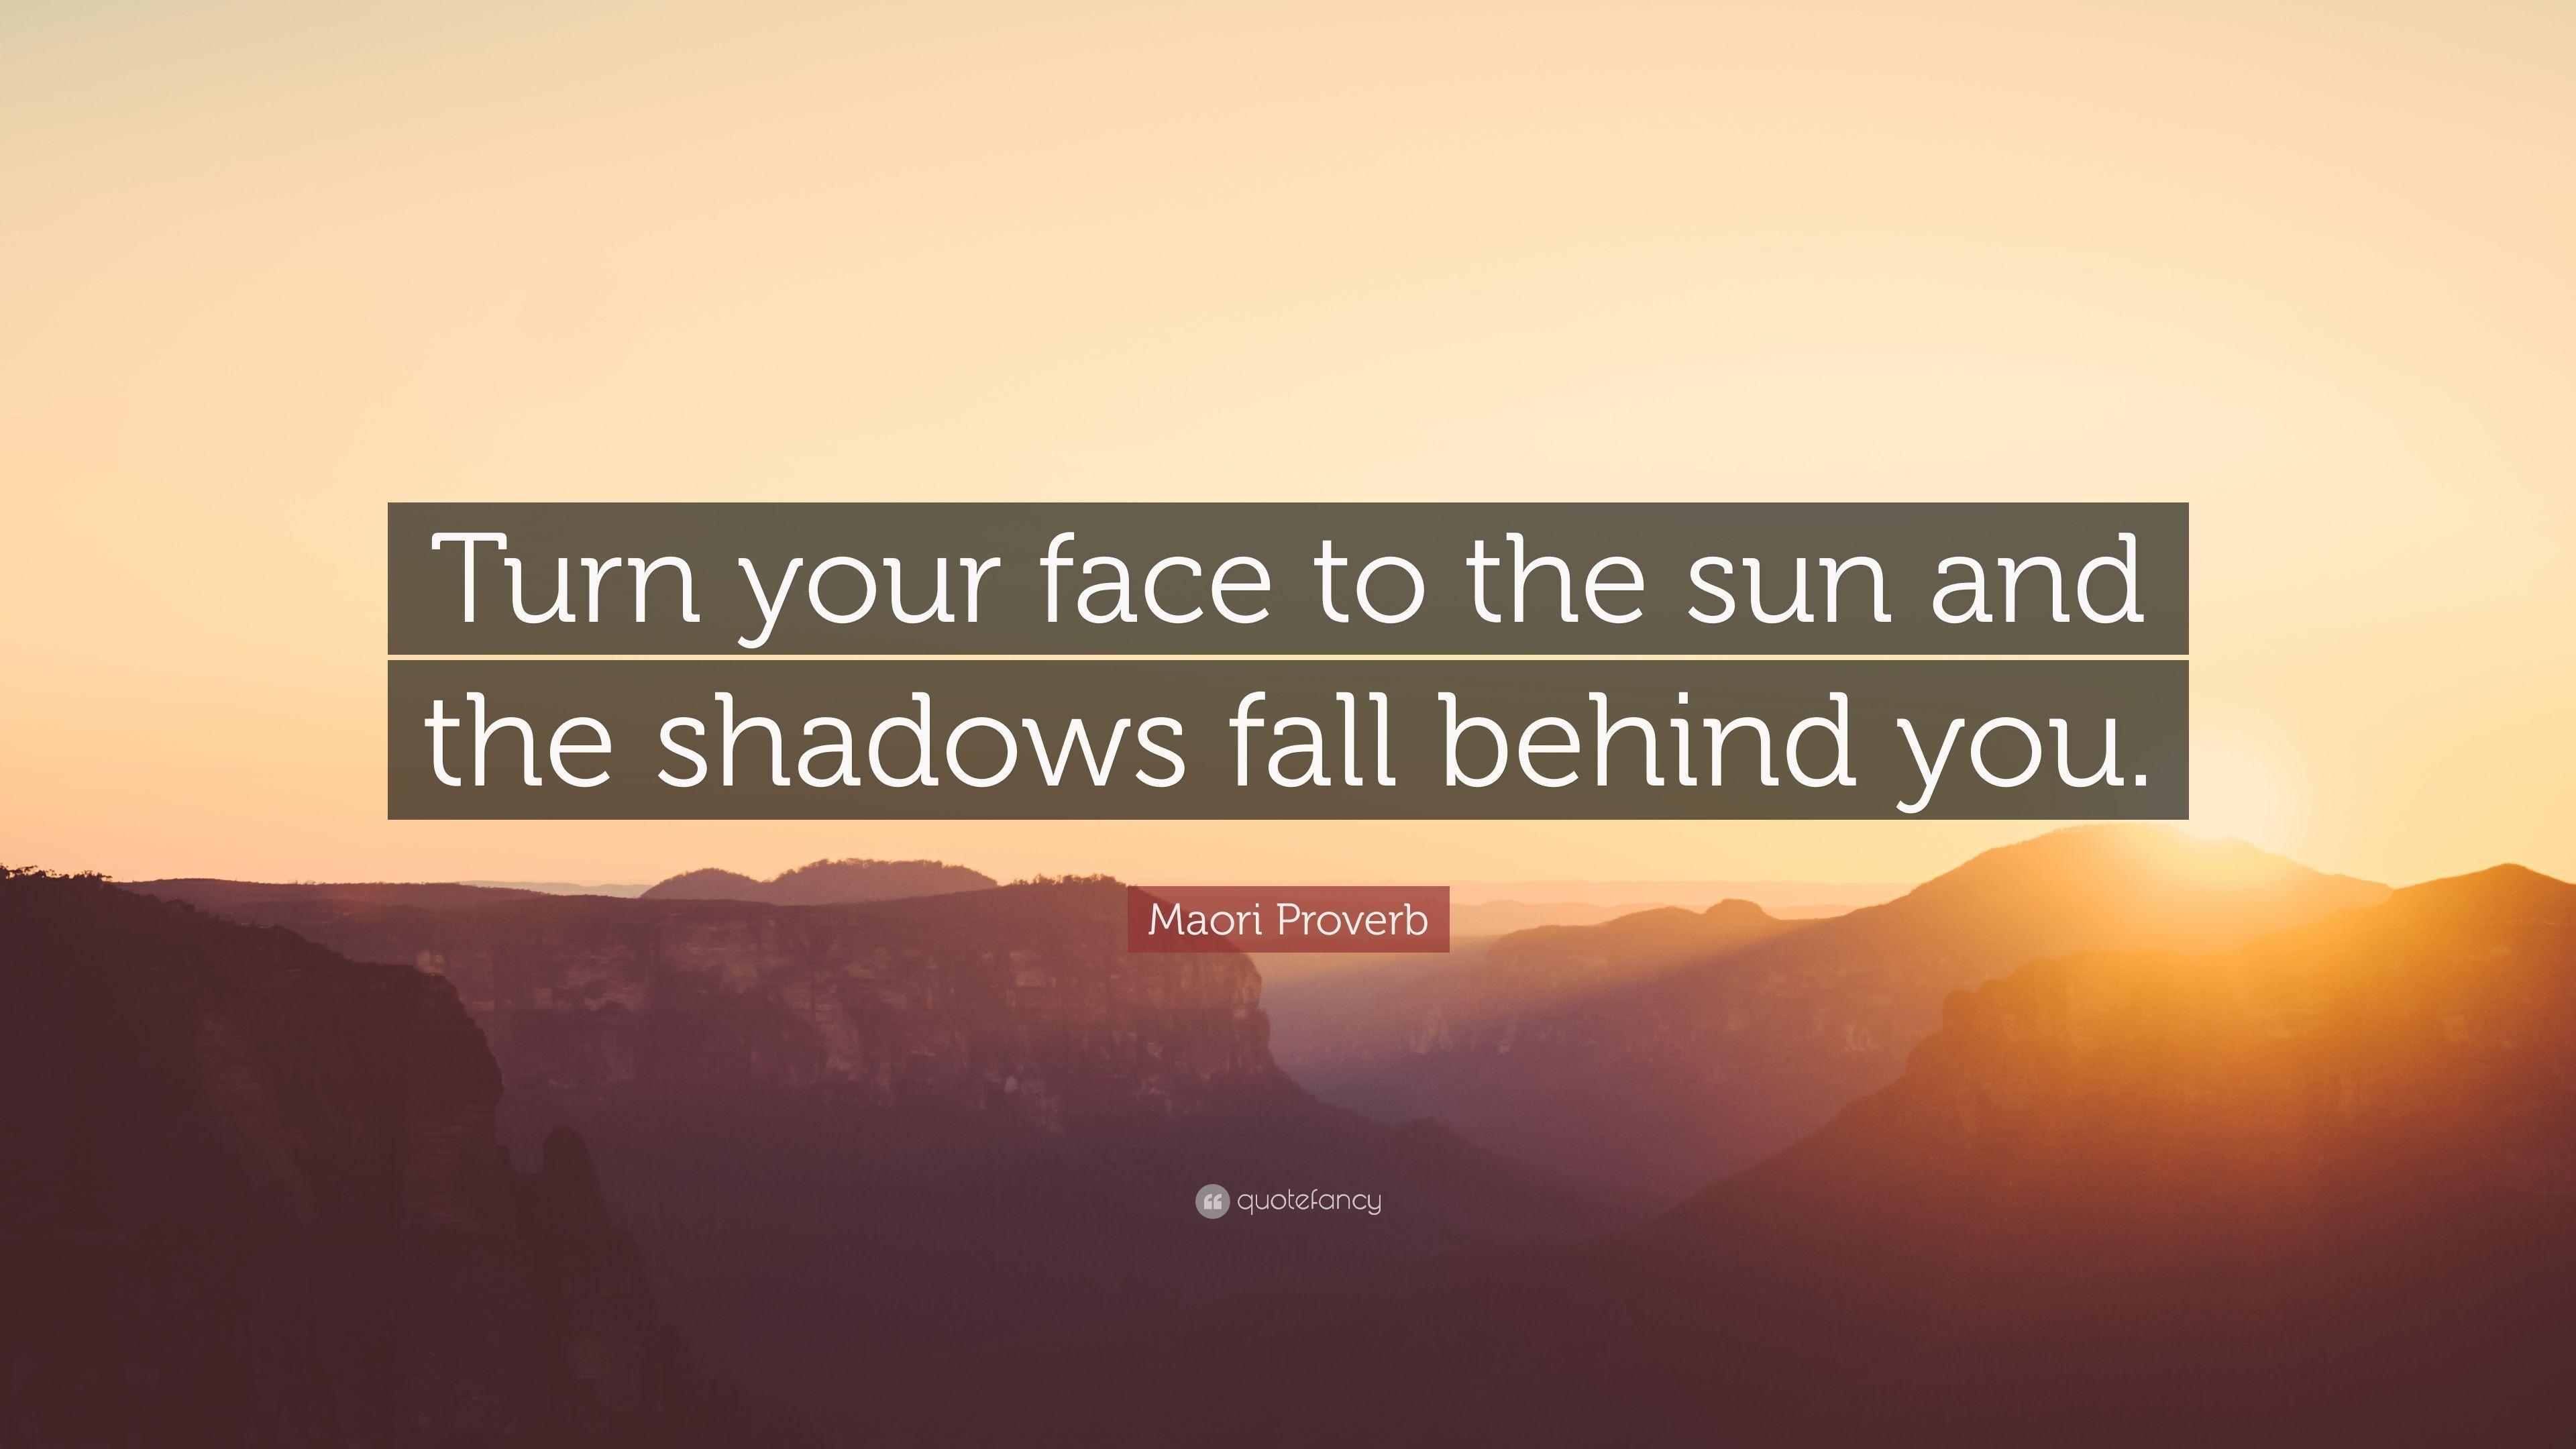 Maori Proverb Quote: “Turn your face to the sun and the shadows